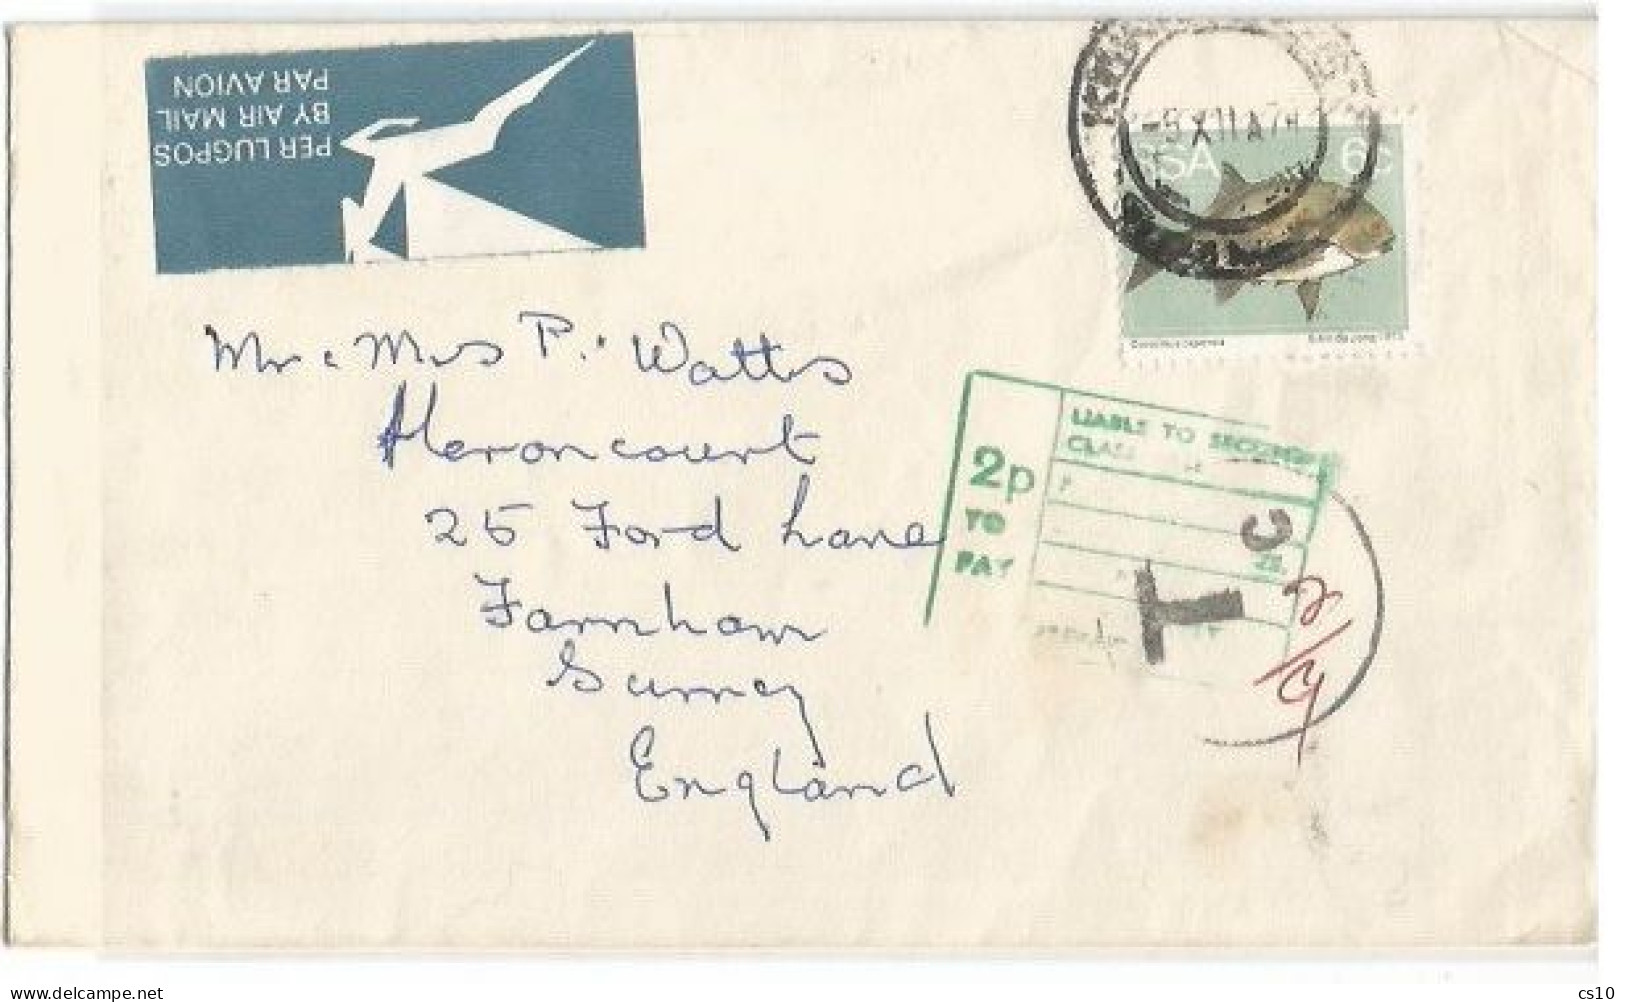 South Africa AirmailCV Kimberley 5dec1974 With Regular C6 Underfranked AND Taxed 2/9 On PMK 2p In UK - Cartas & Documentos